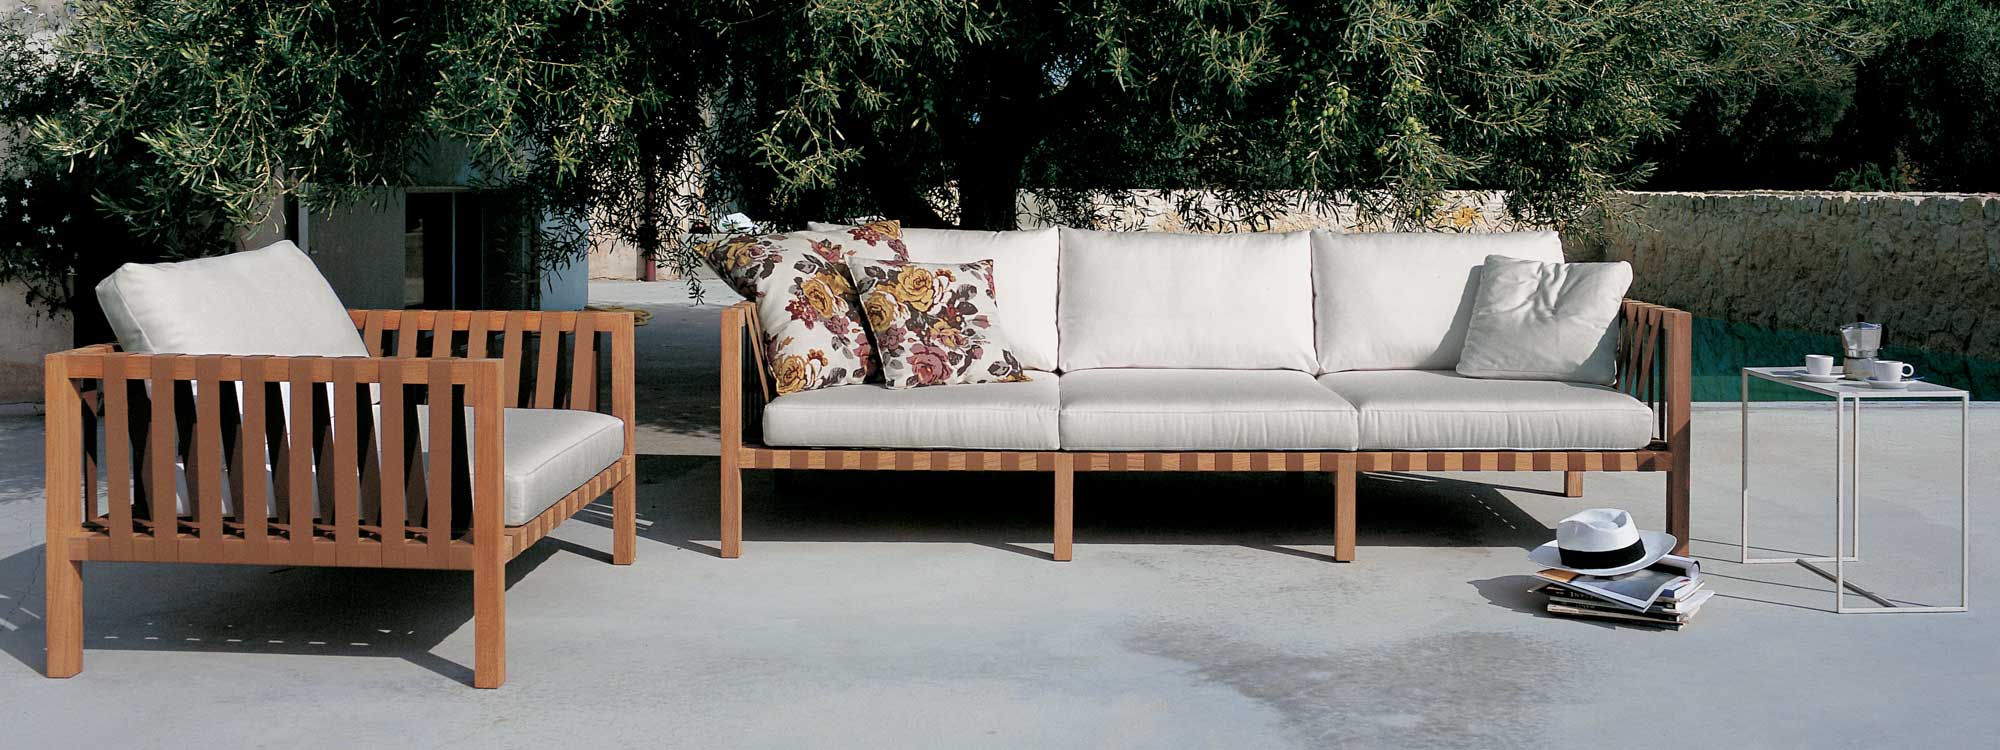 Image of RODA Mistral teak sofa and lounge chair with tobacco-colored webbing and white cushions on sunny terrace with tree in background